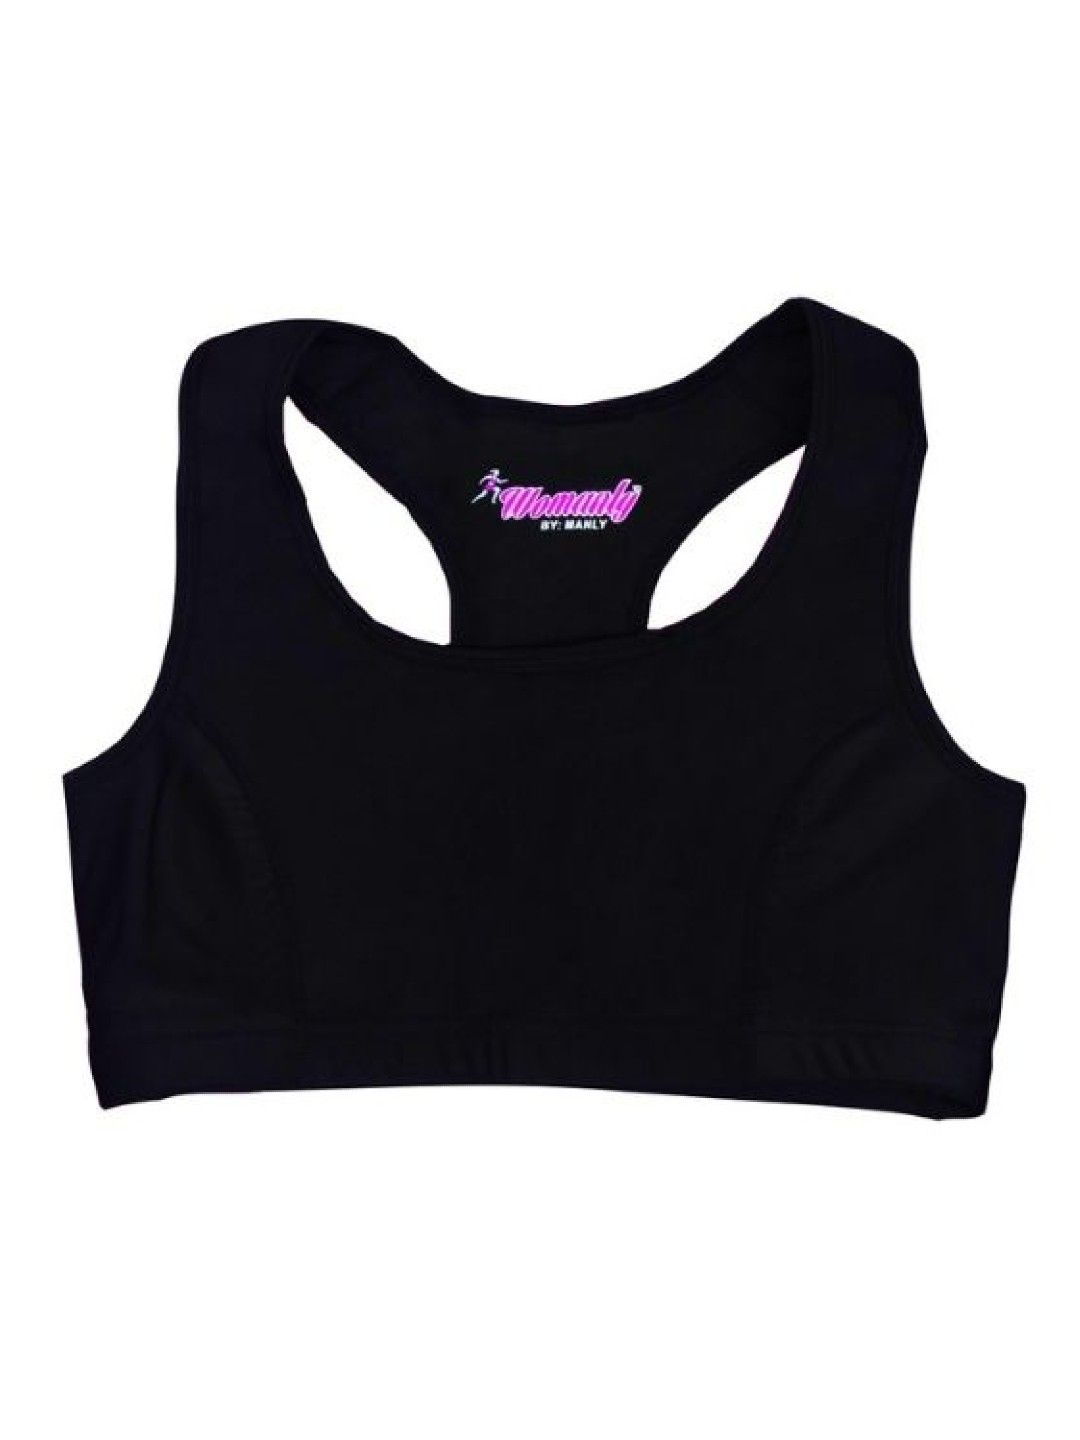 Womanly Dry Fit Sports Bra